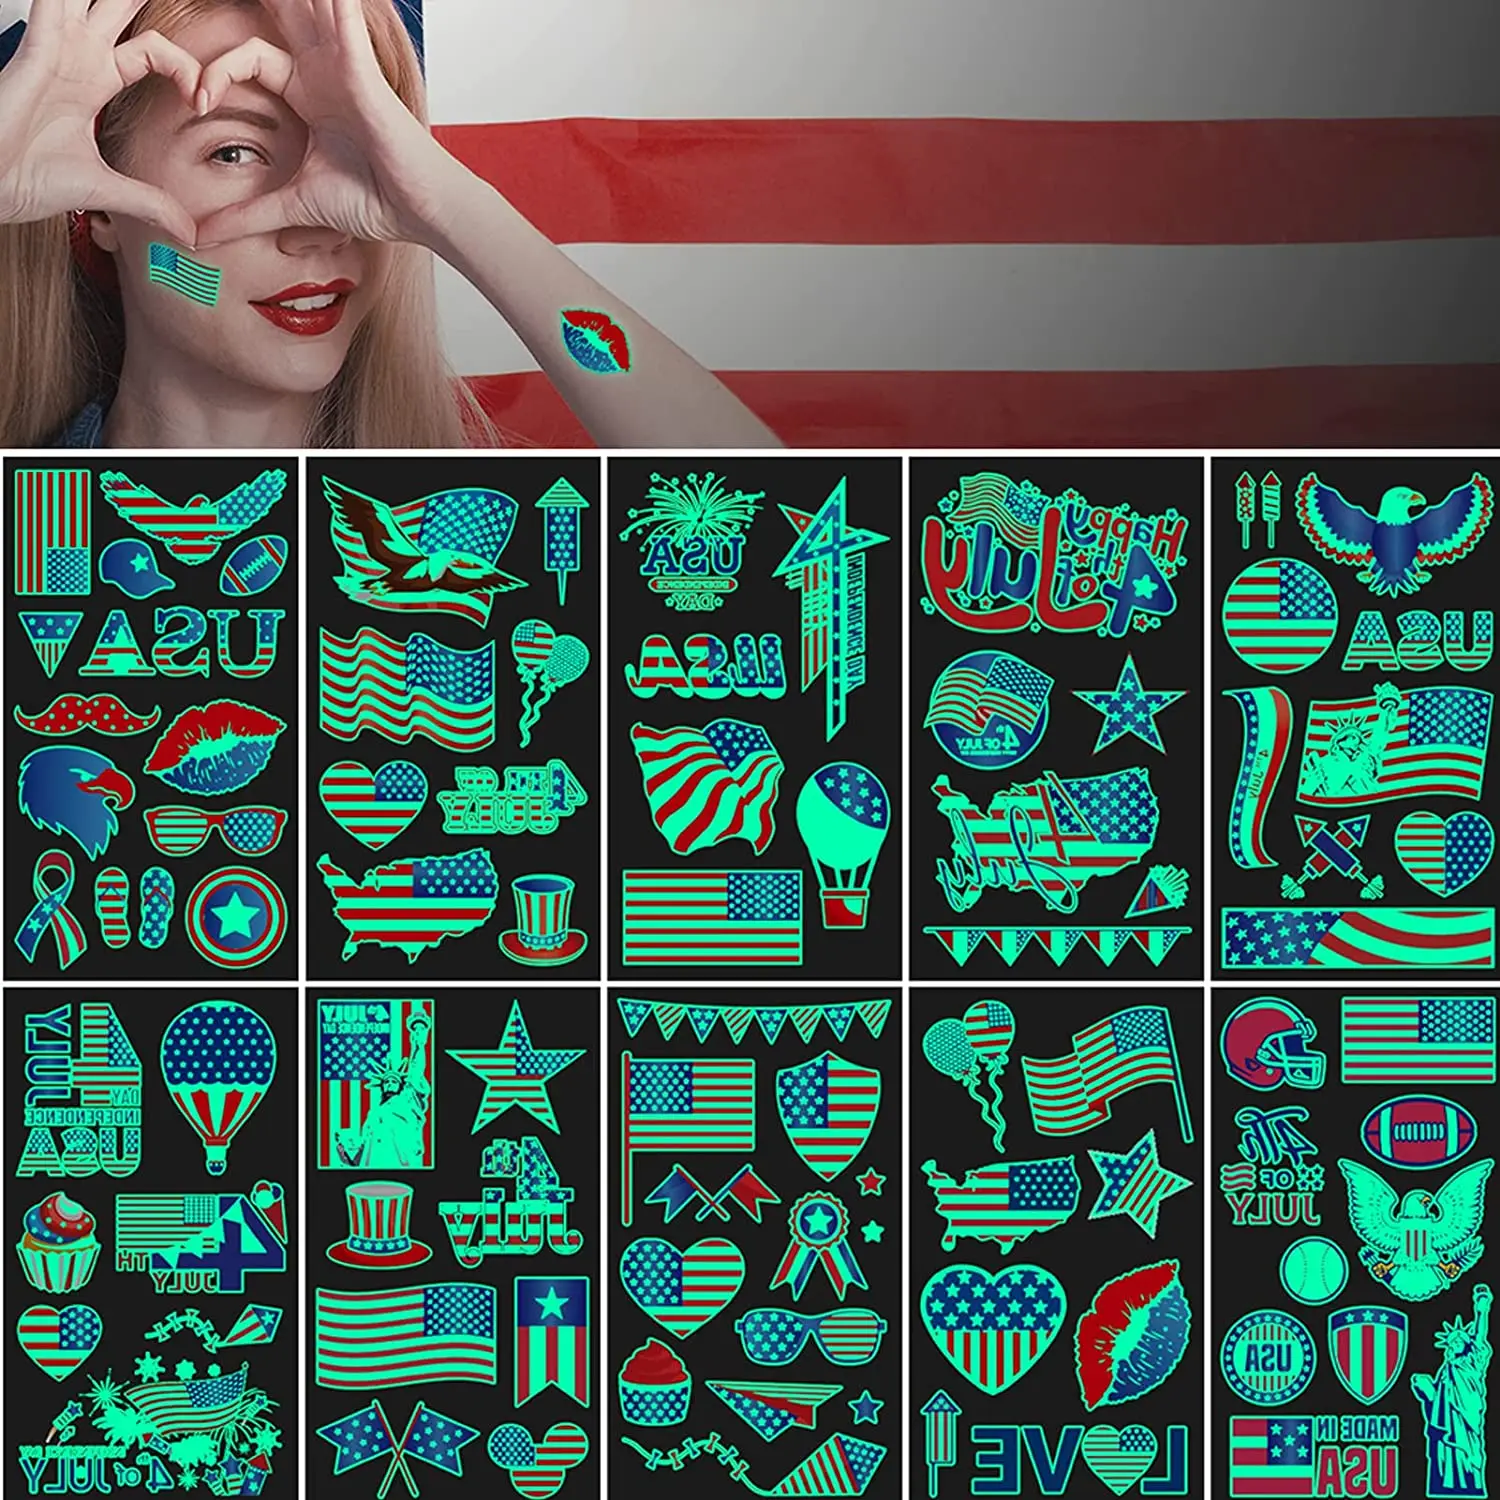 Buy July 4th American Luminous Independence Day Flag Tattoo Sticker 88 PCS  Party Tattoo Sticker Patriotic Independence Day Temporary Tattoo Sticker  Online at Lowest Price in Ubuy India B08ZDQSTGY